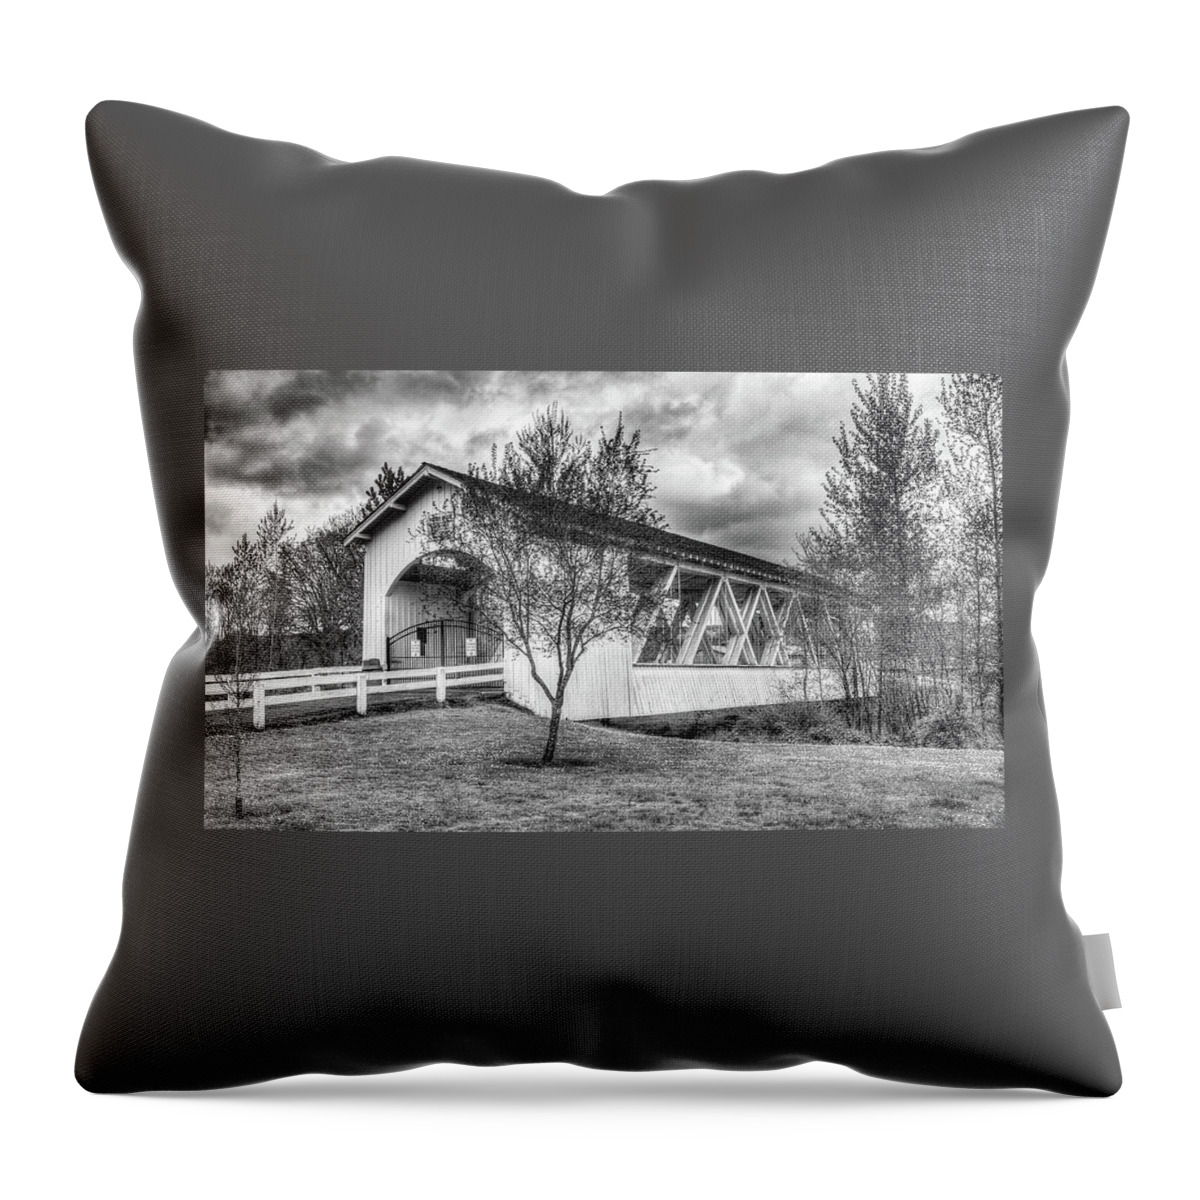 Weddle Covered Bridge Throw Pillow featuring the photograph Weddle Covered Bridge by Thom Zehrfeld